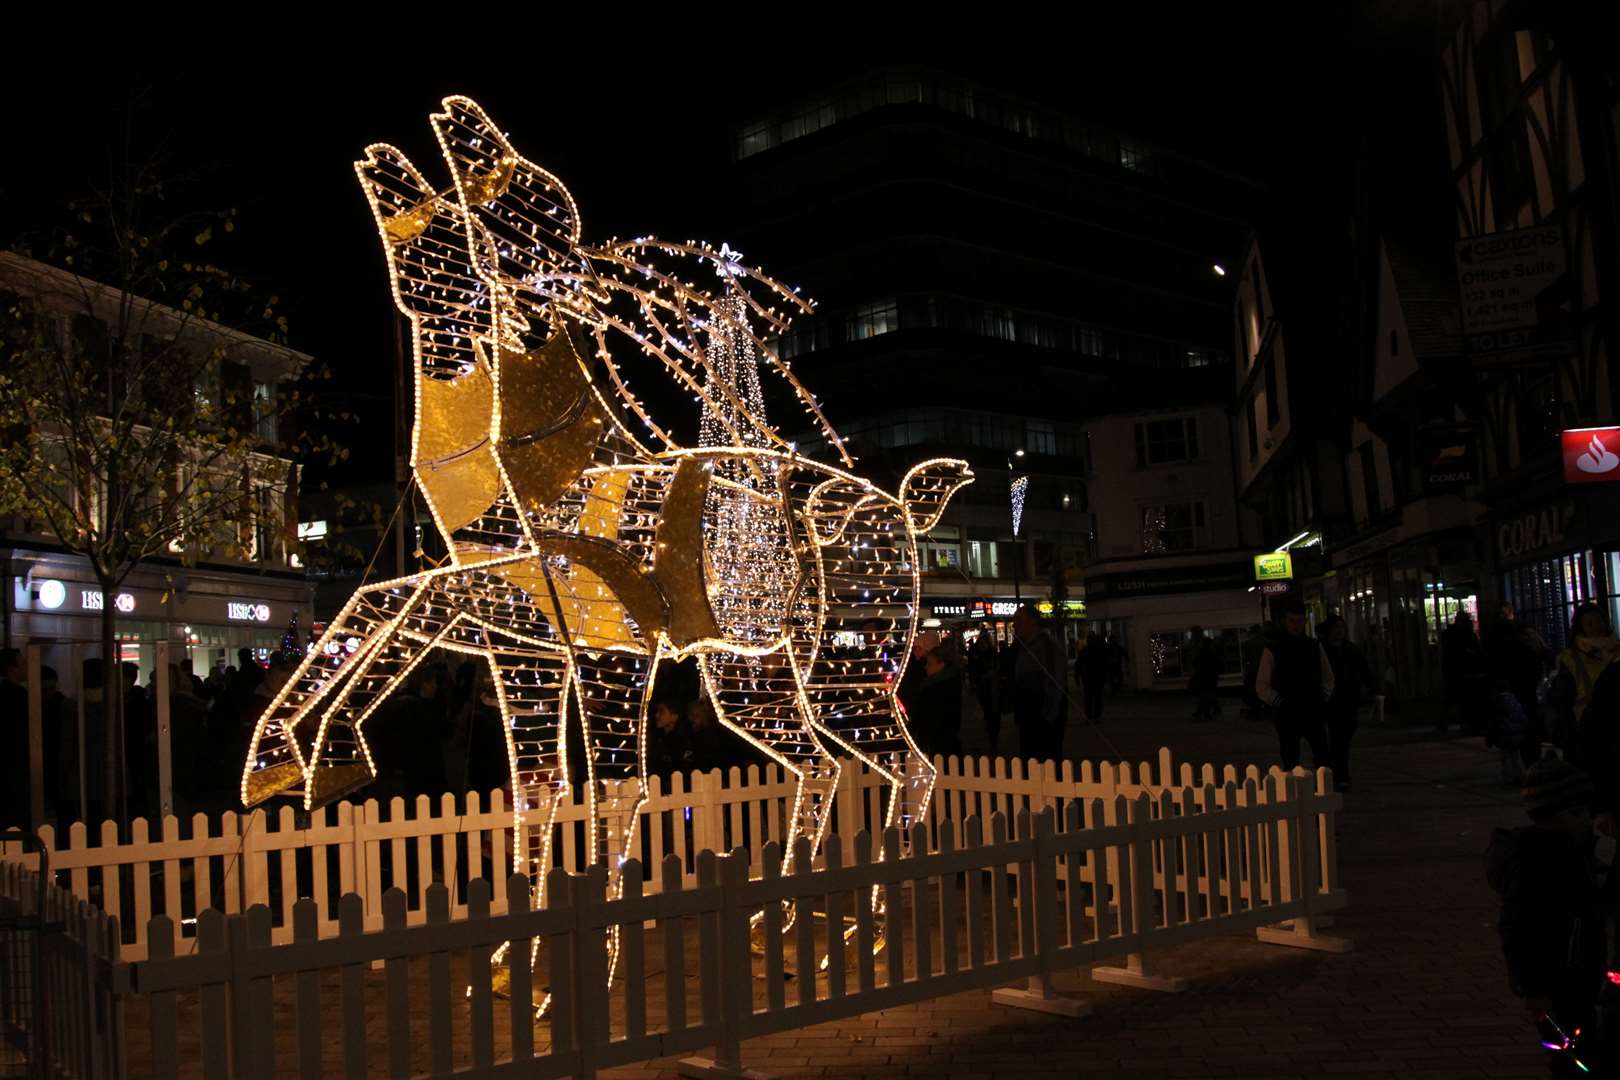 The illuminated reindeer in happier times